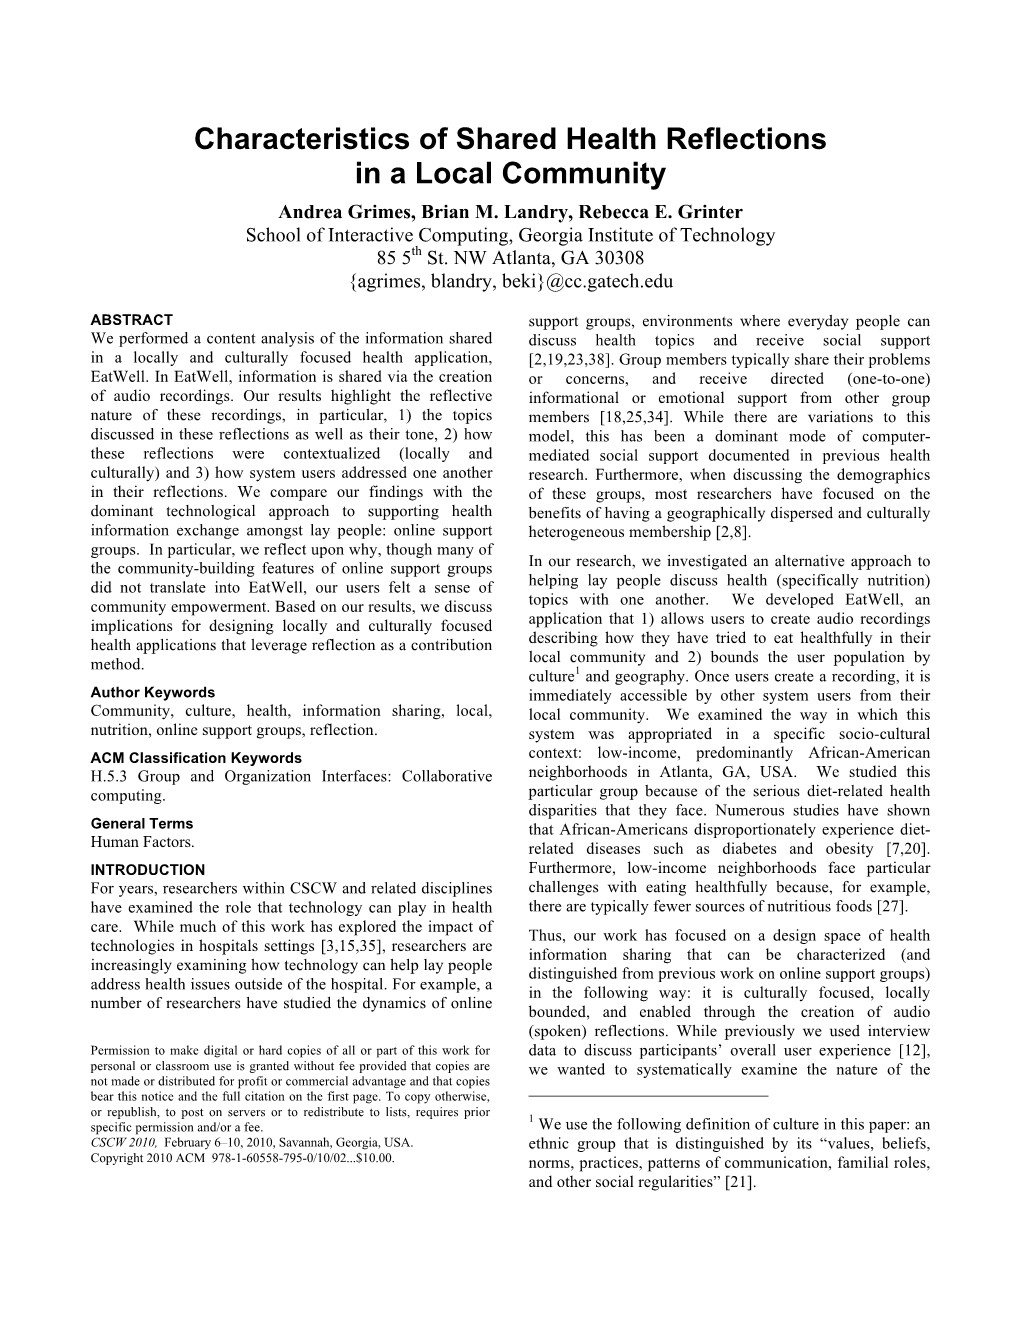 Characteristics of Shared Health Reflections in a Local Community Andrea Grimes, Brian M